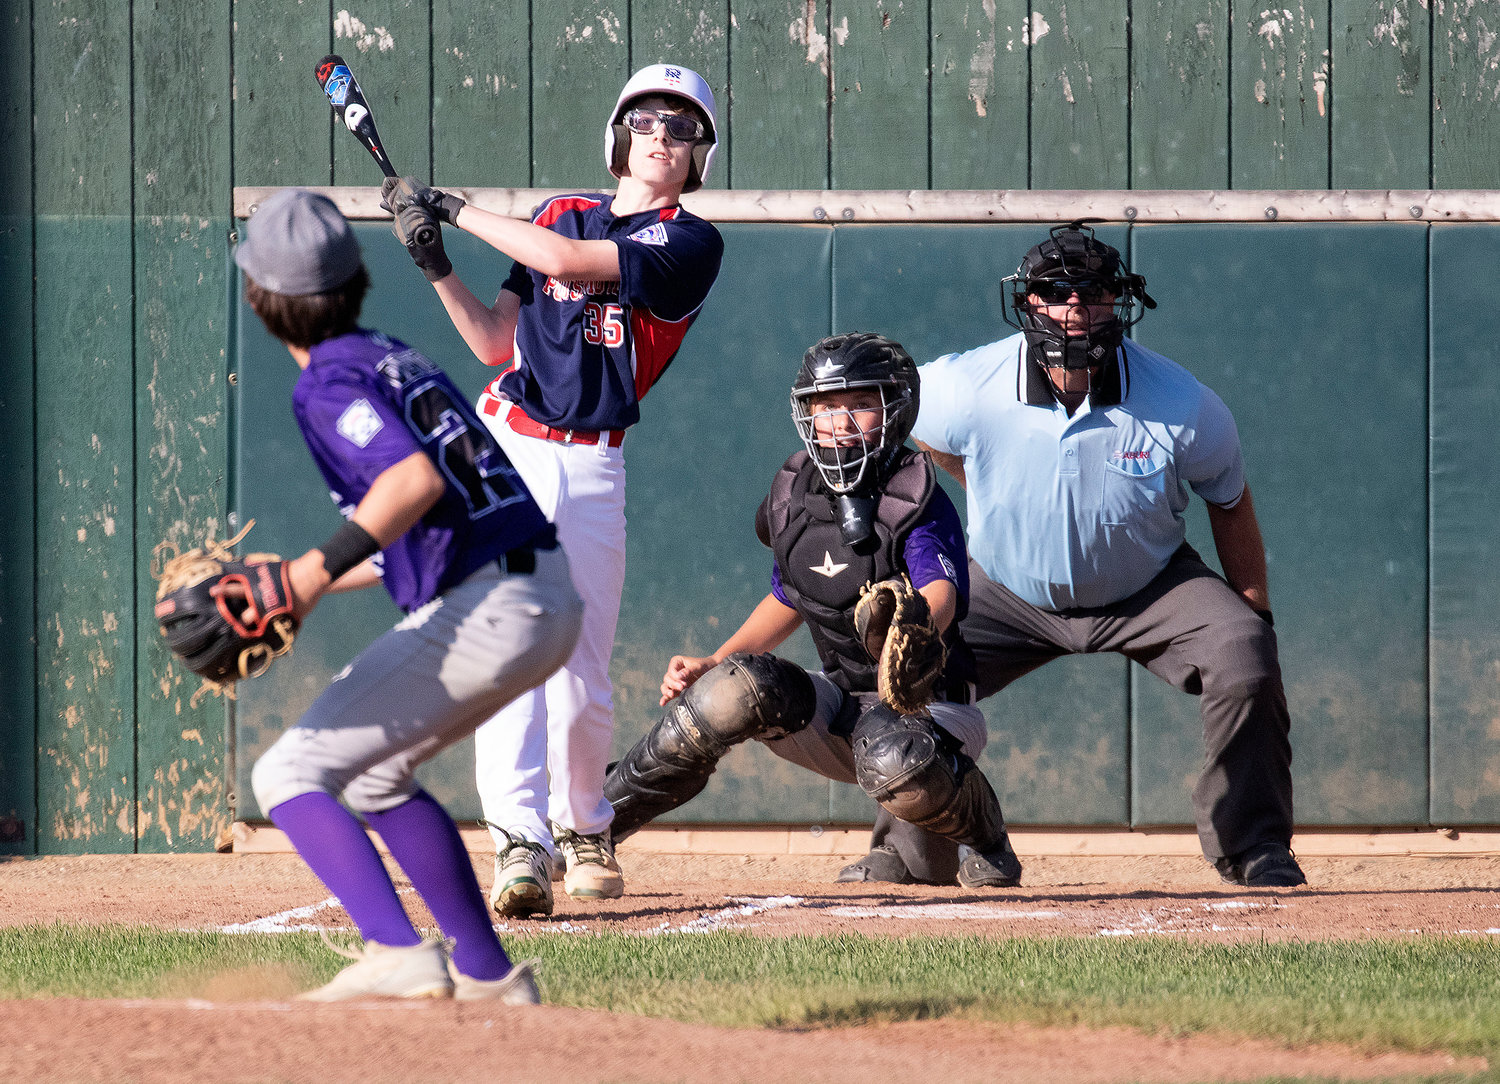 Tyler Boiani blasts a Parker DeWolf pitch over the centerfield fence to give Portsmouth a 2-1 lead in the first inning. Boiani later scored the winning run on a passed ball.